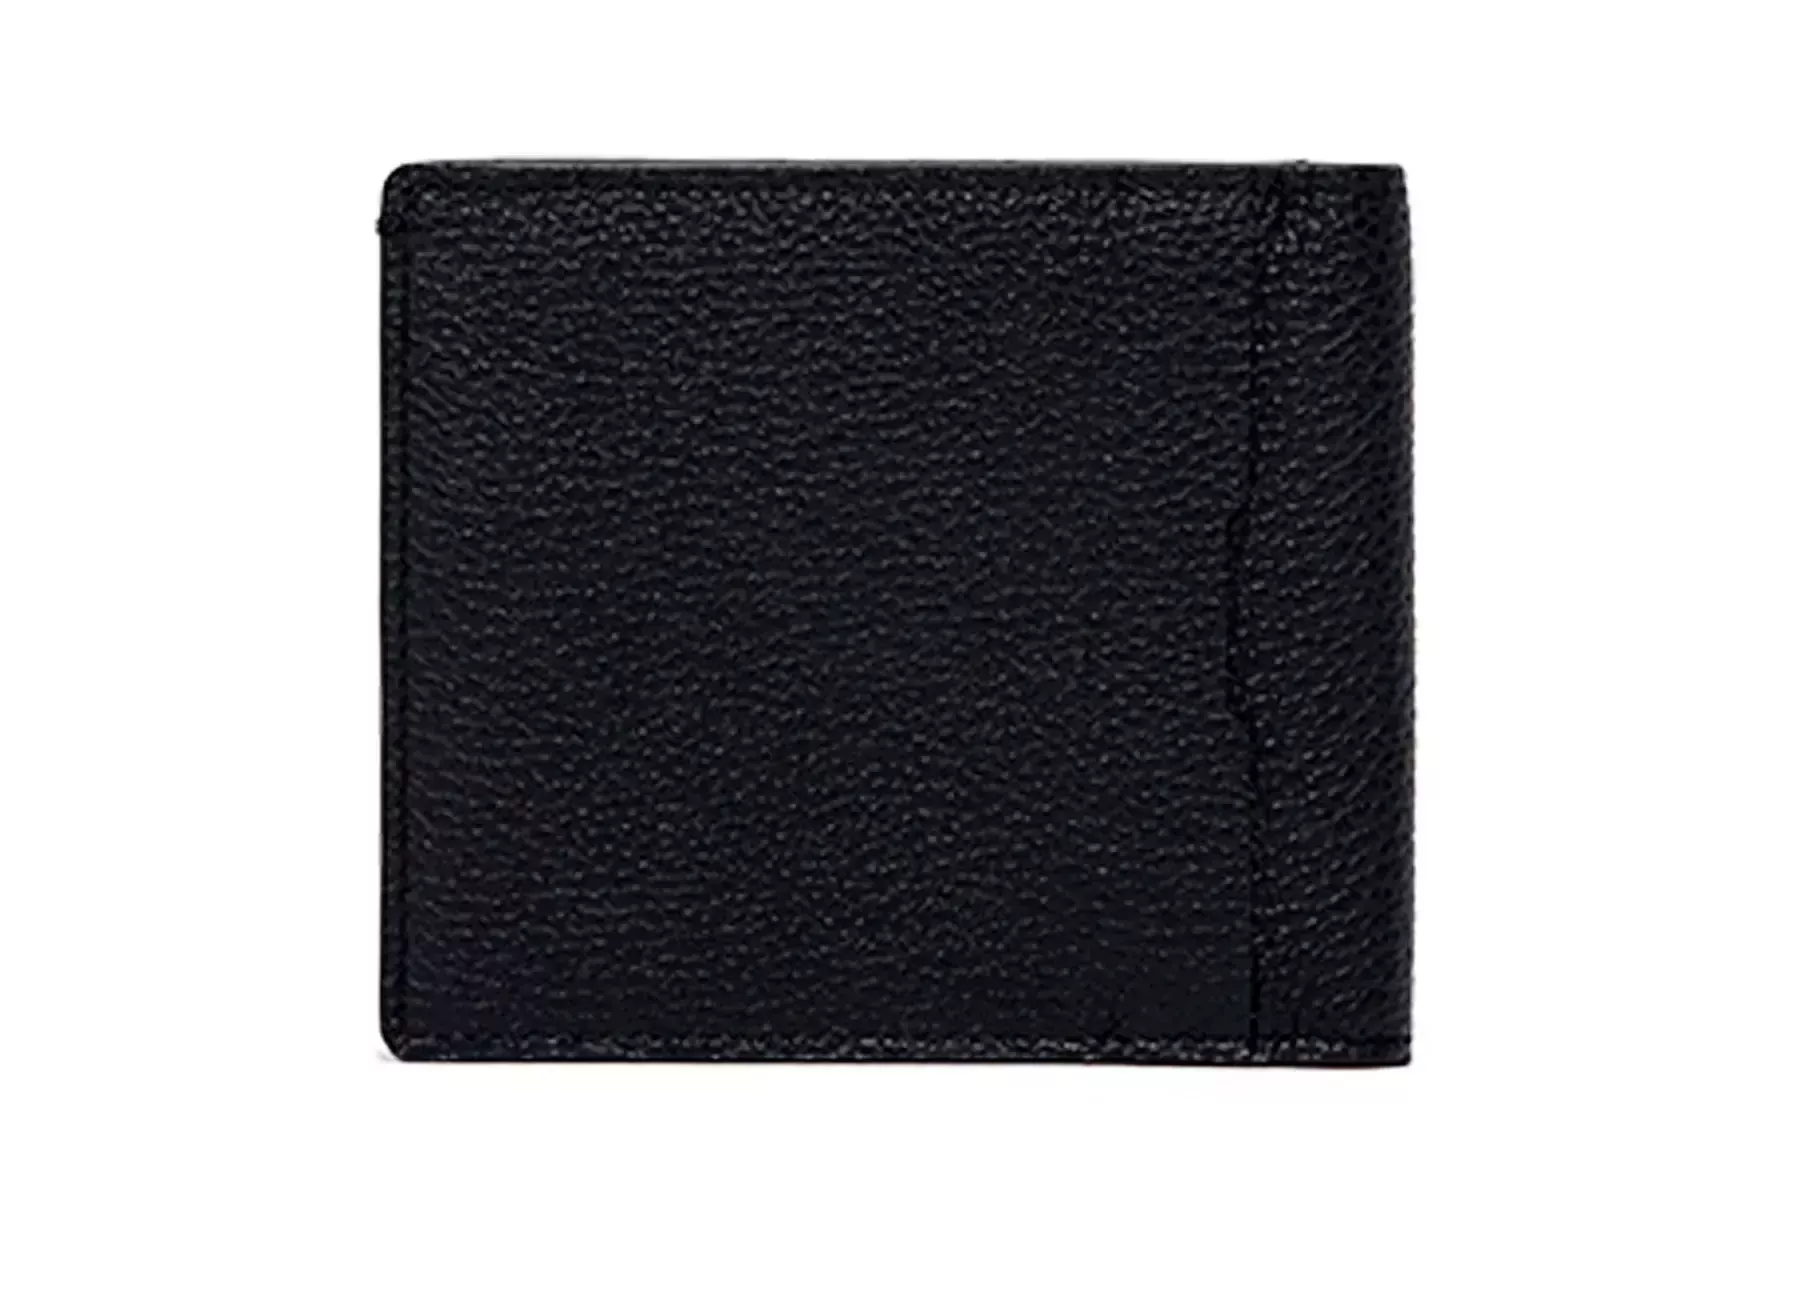 Grained Collection Wallet with 8 credit card slots